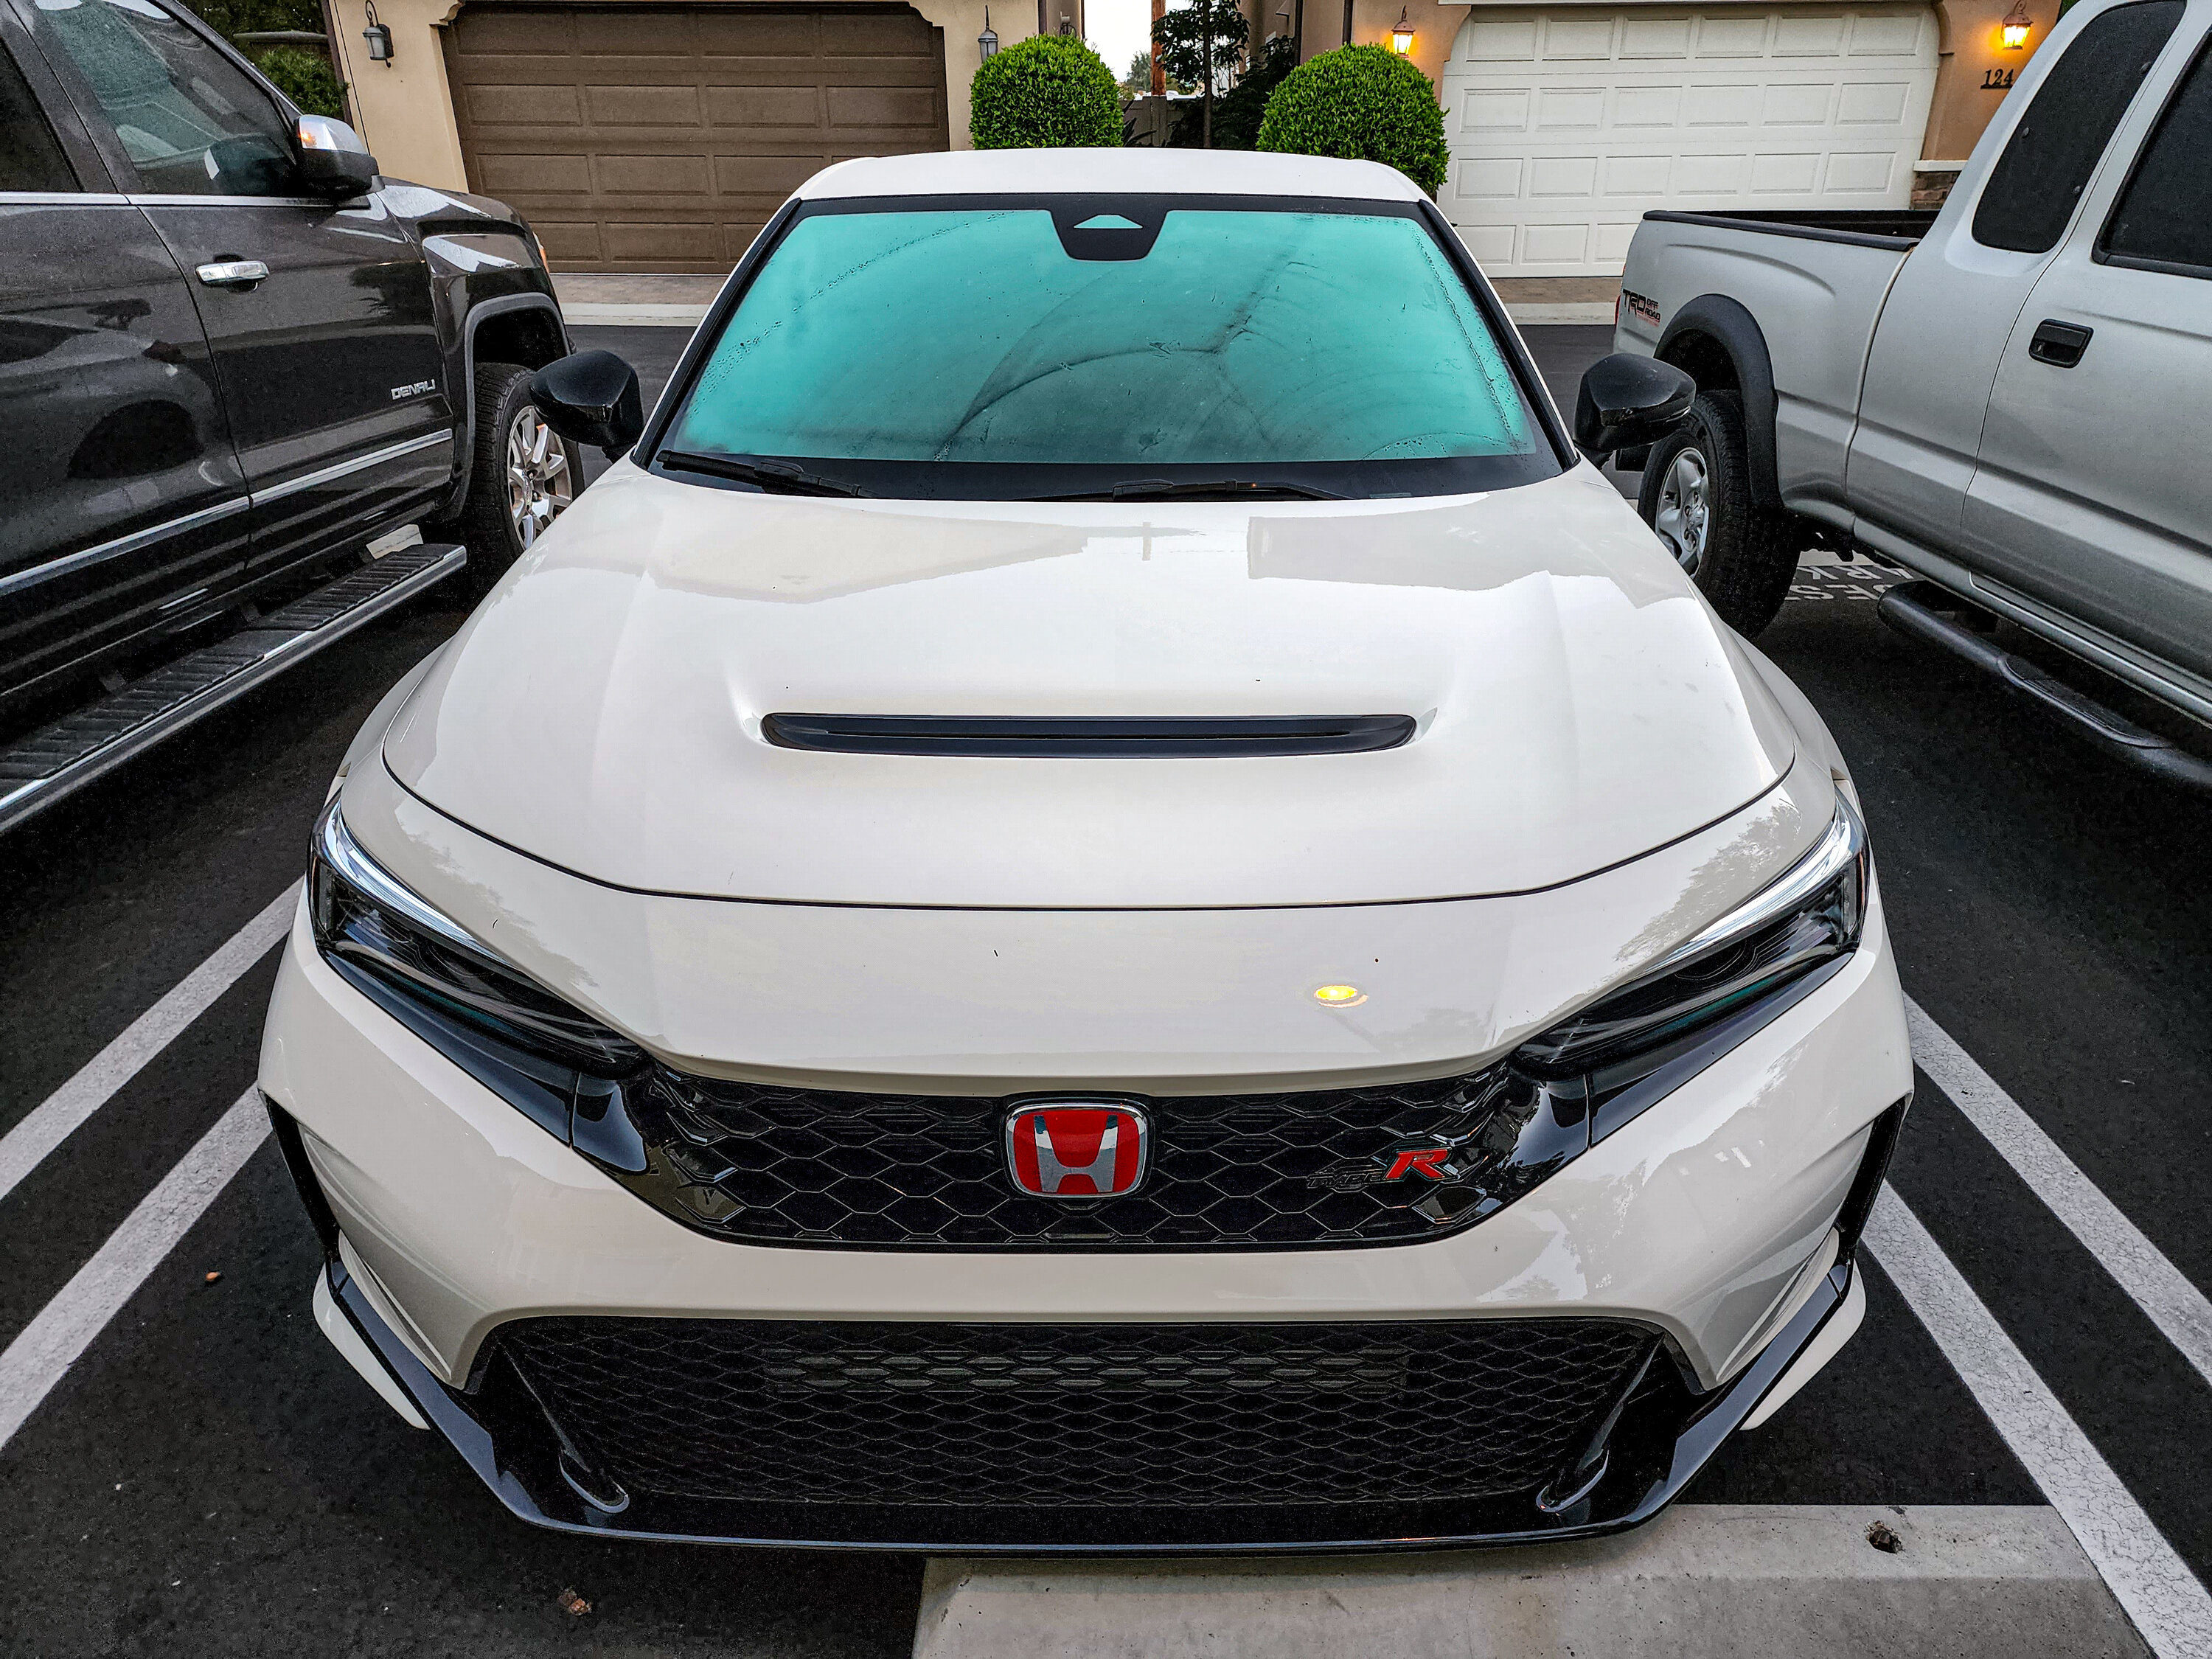 11th Gen Honda Civic 2023 Civic Type R Parked up in Championship White (California) 20220814_061526